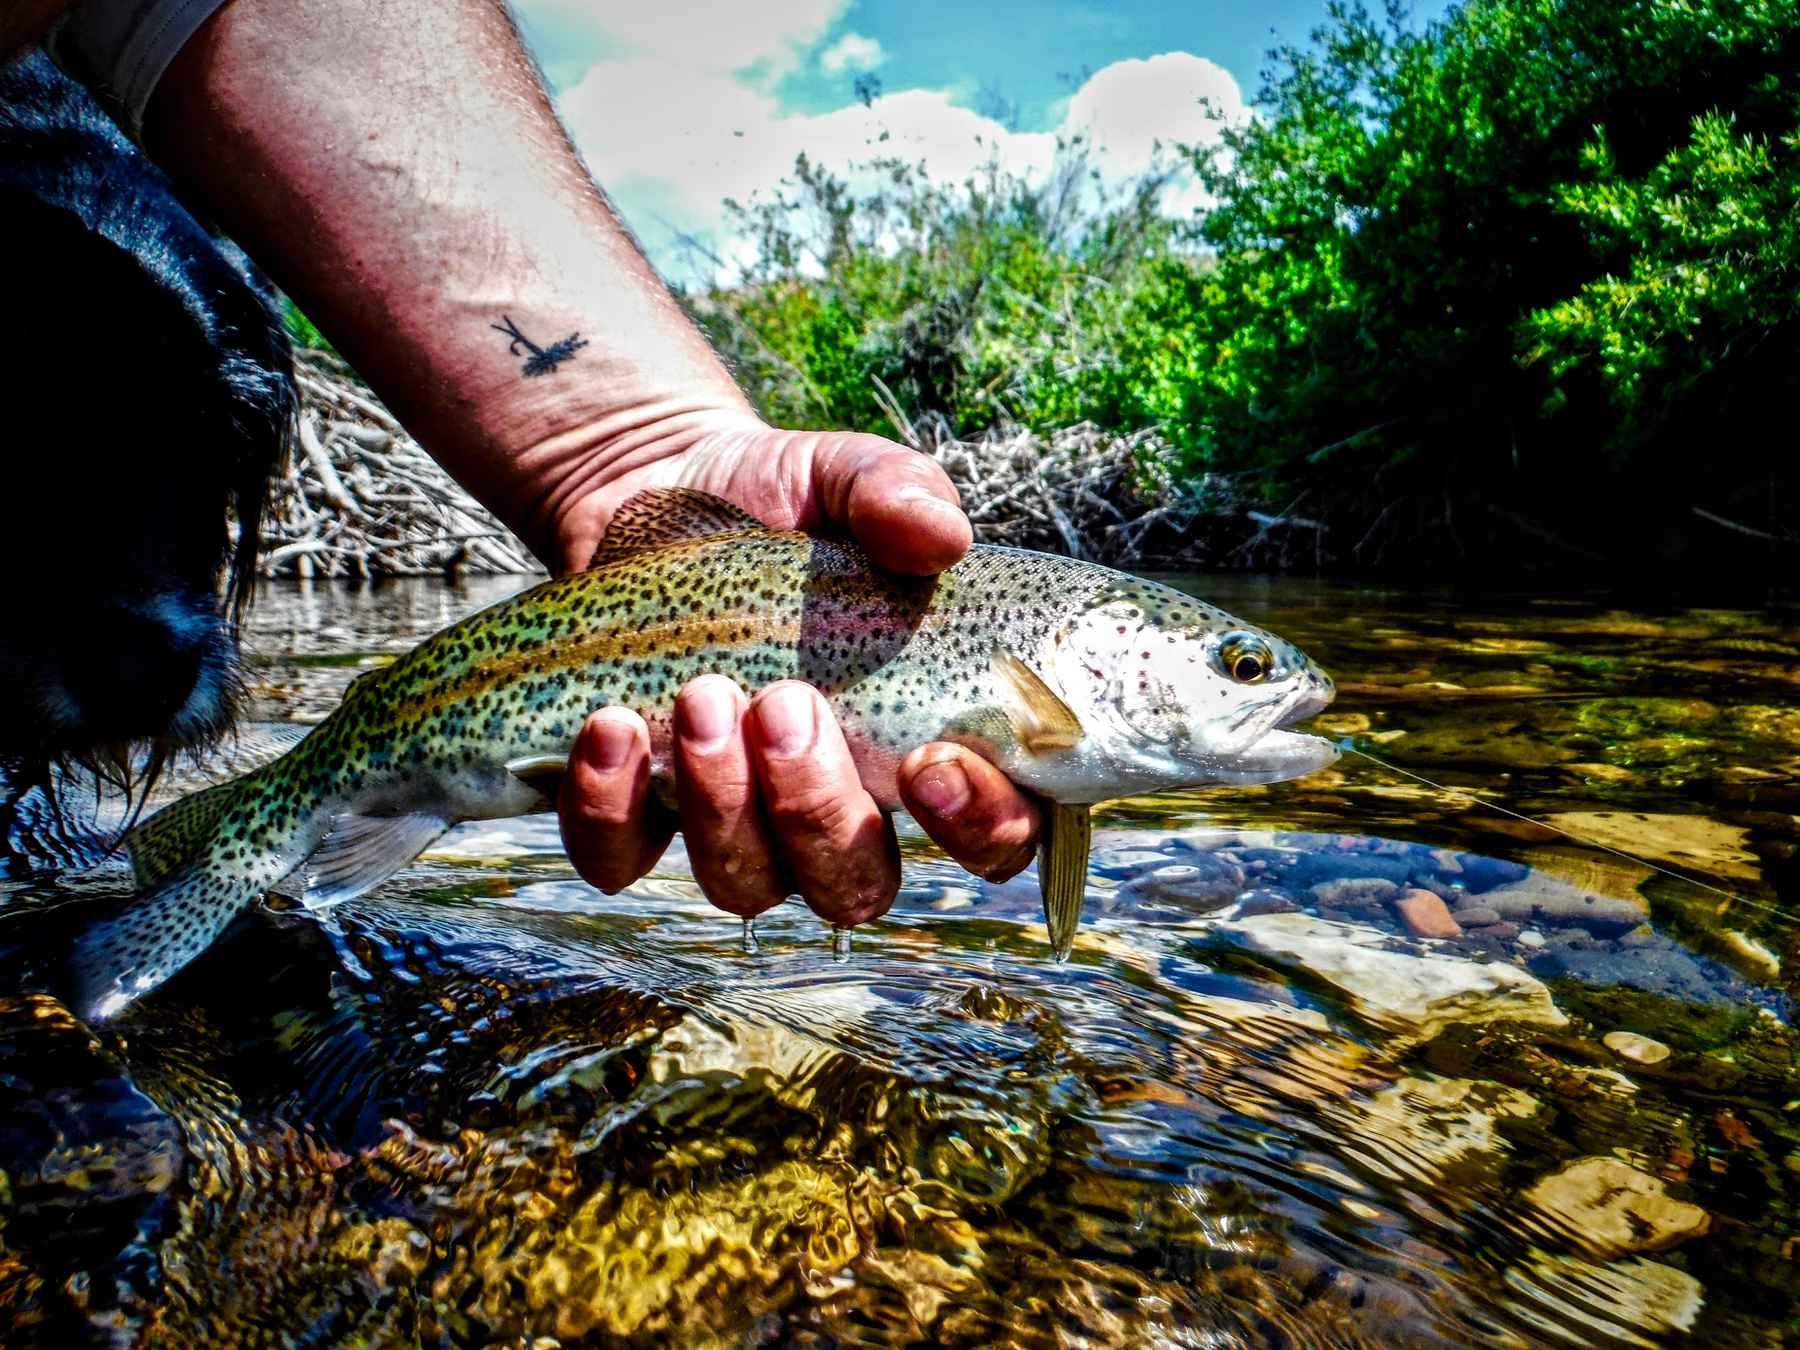 For dry-fly creek freaks, it's the best time of the year